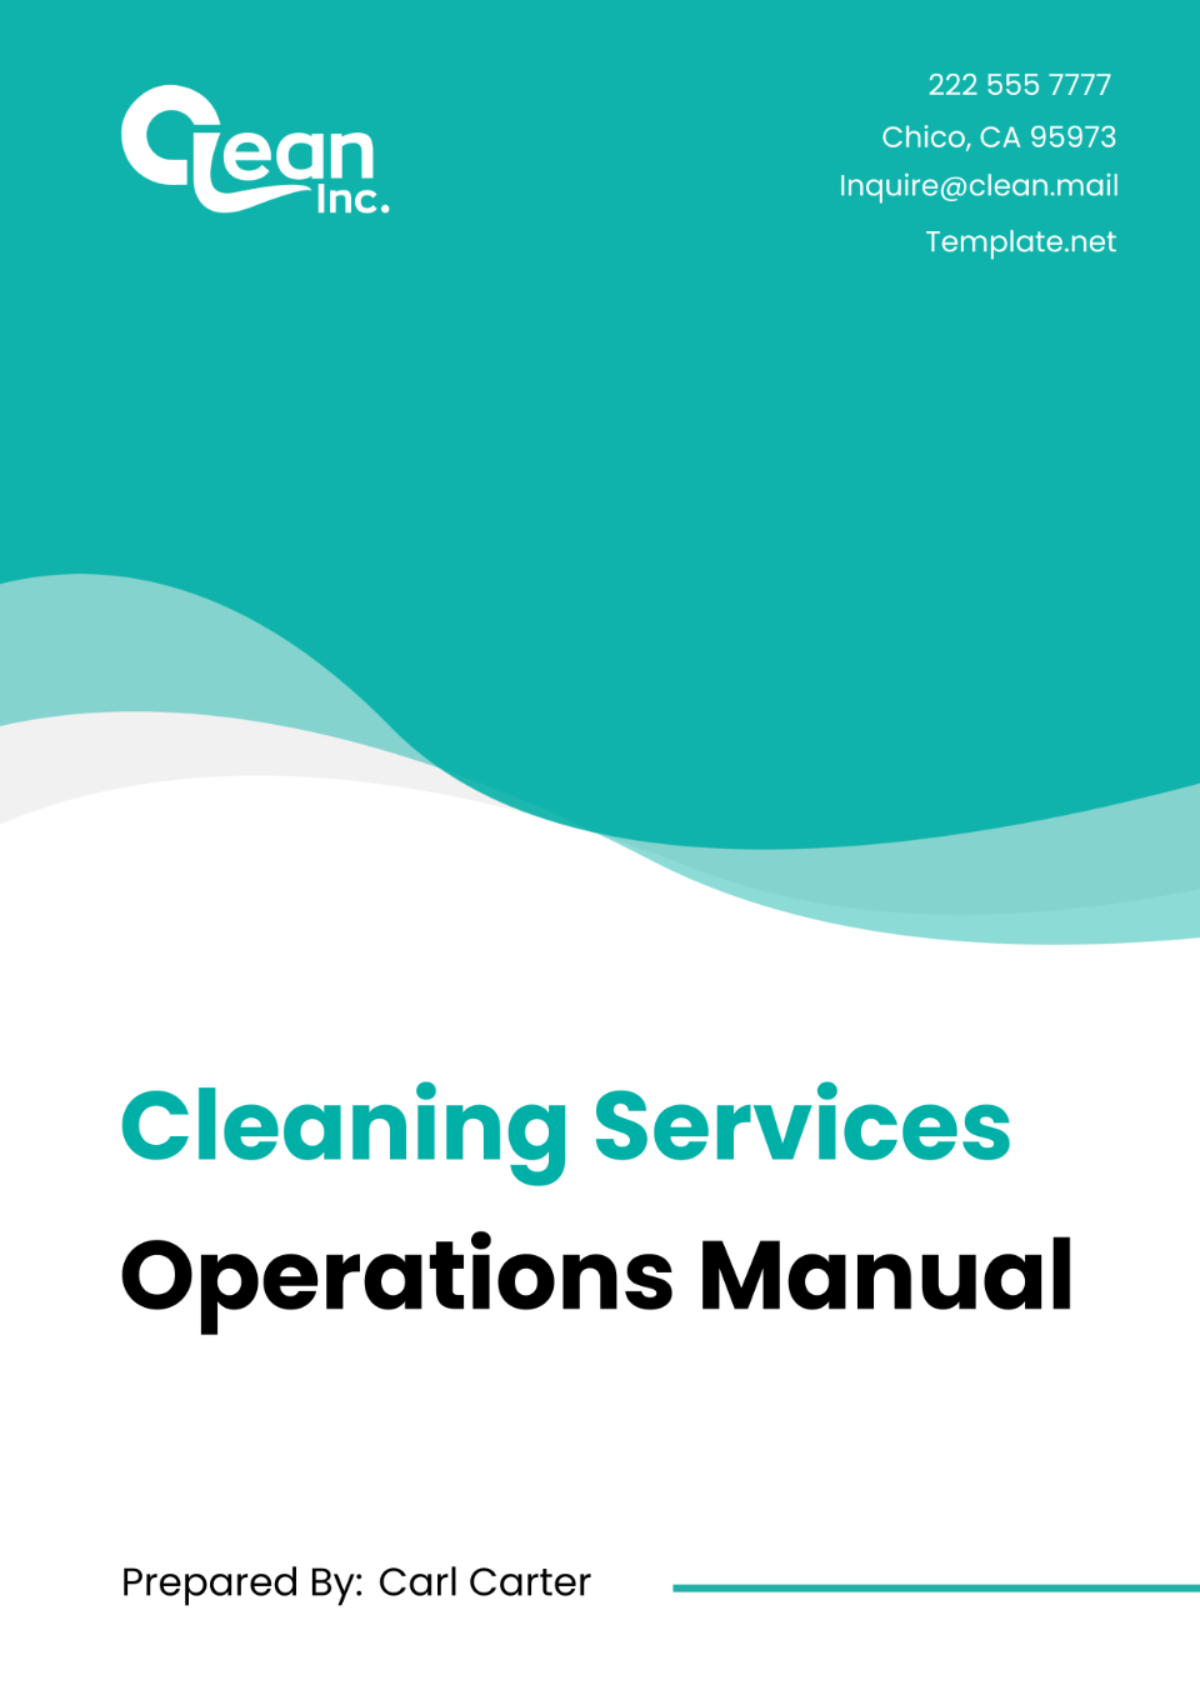 Cleaning Services Operations Manual Template